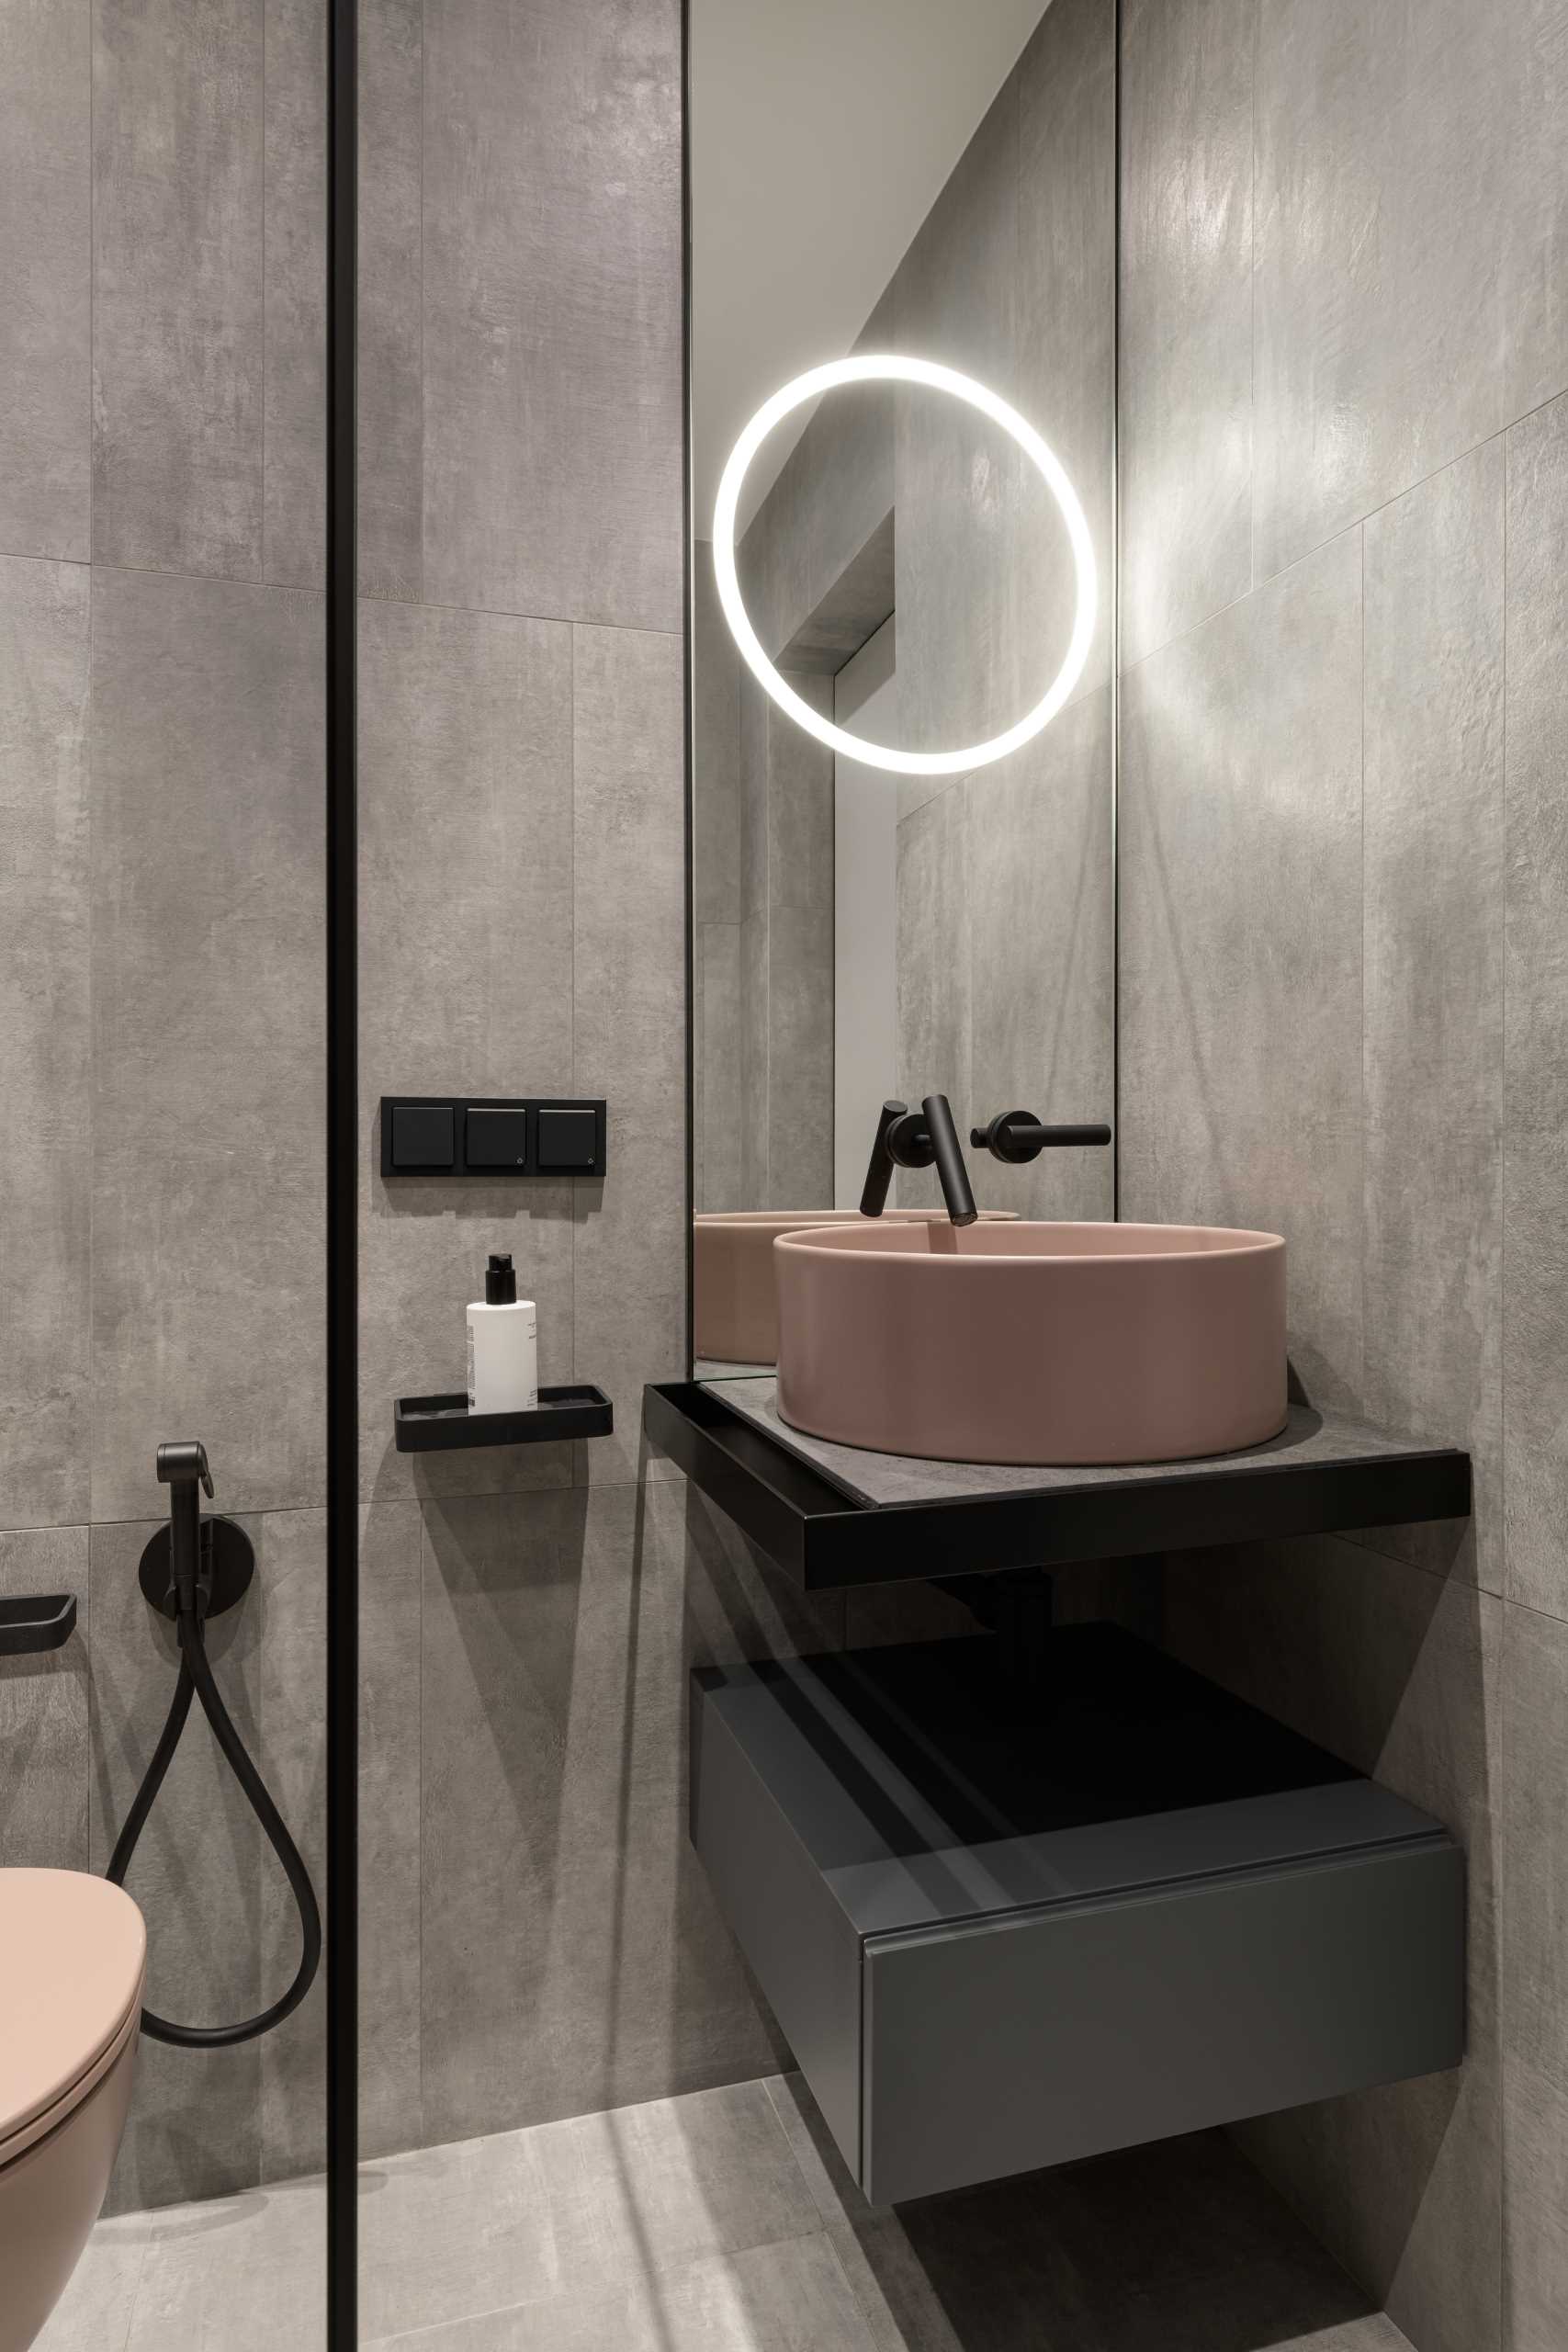 A modern bathroom with black accents.